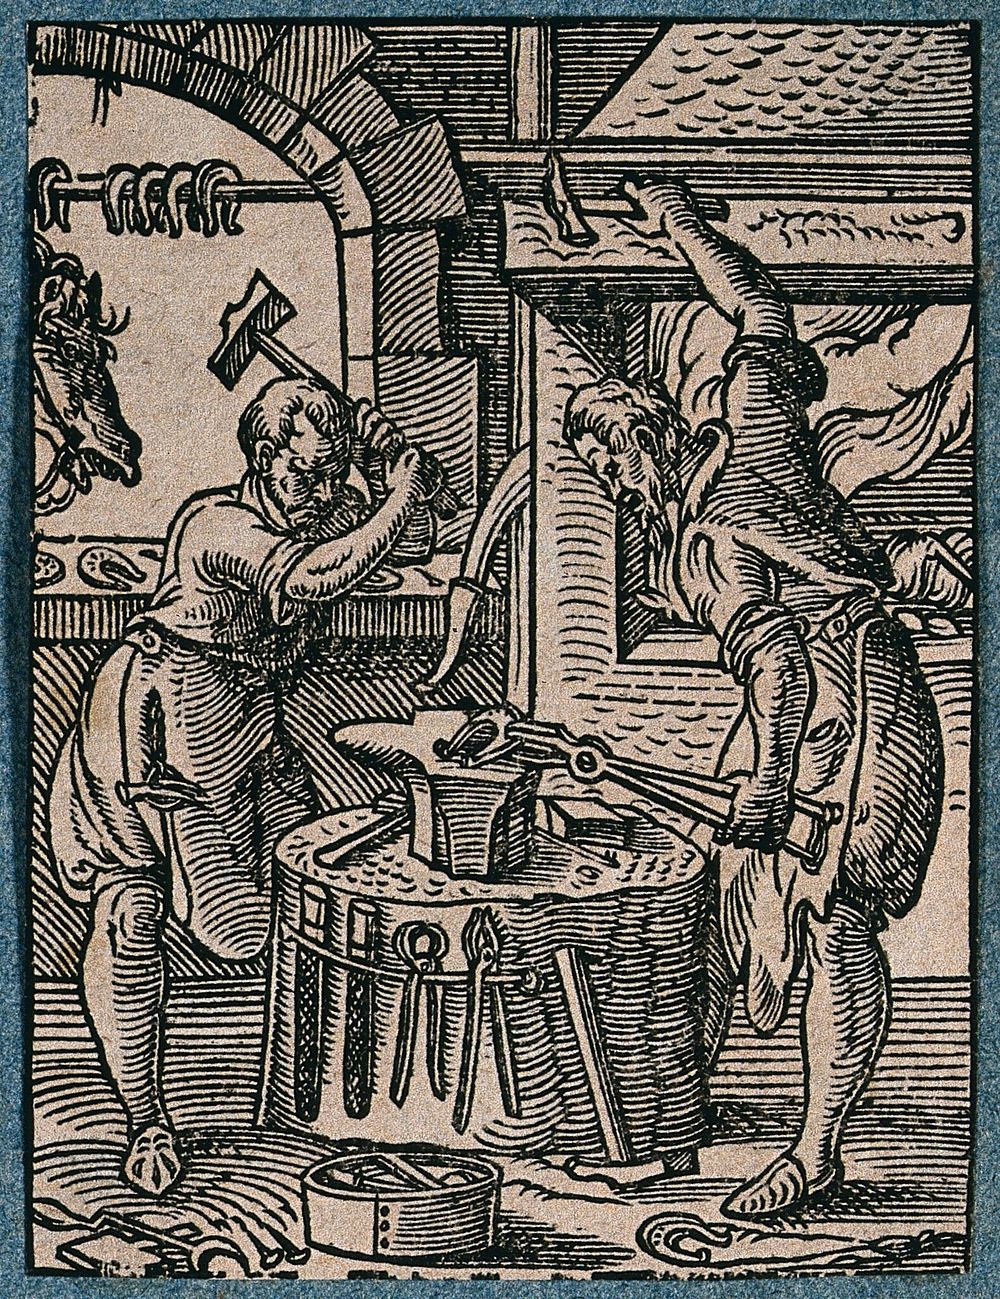 Blacksmiths making a horseshoe on an anvil while finished horseshoes hang on a rail in the window. Woodcut by J. Amman.